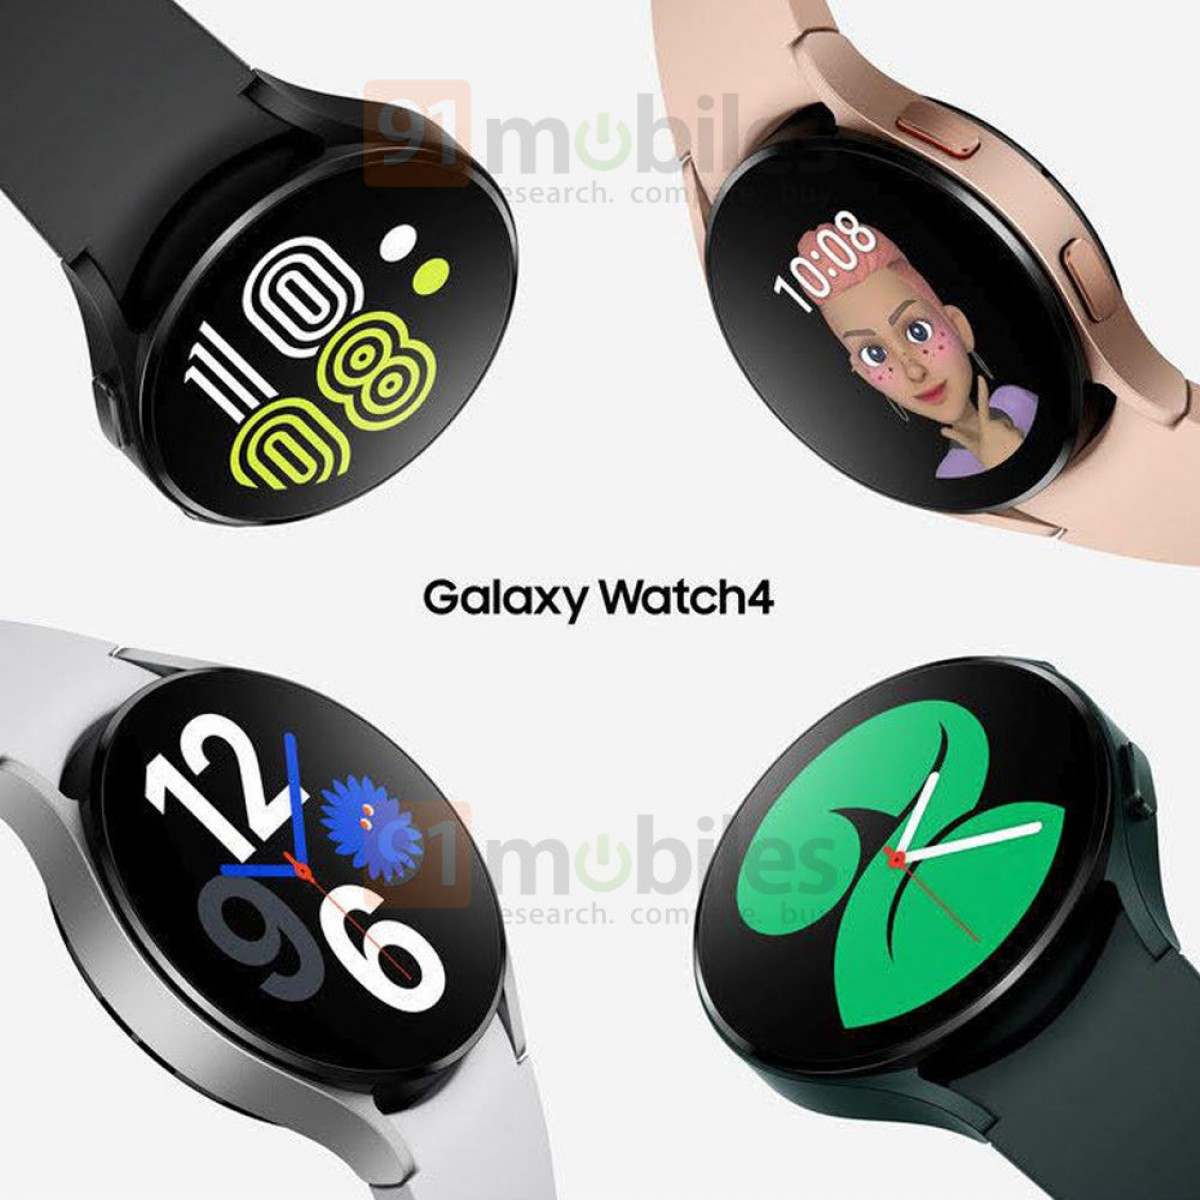 Samsung Galaxy Watch 4 makers Figure 91 Mobile Phones